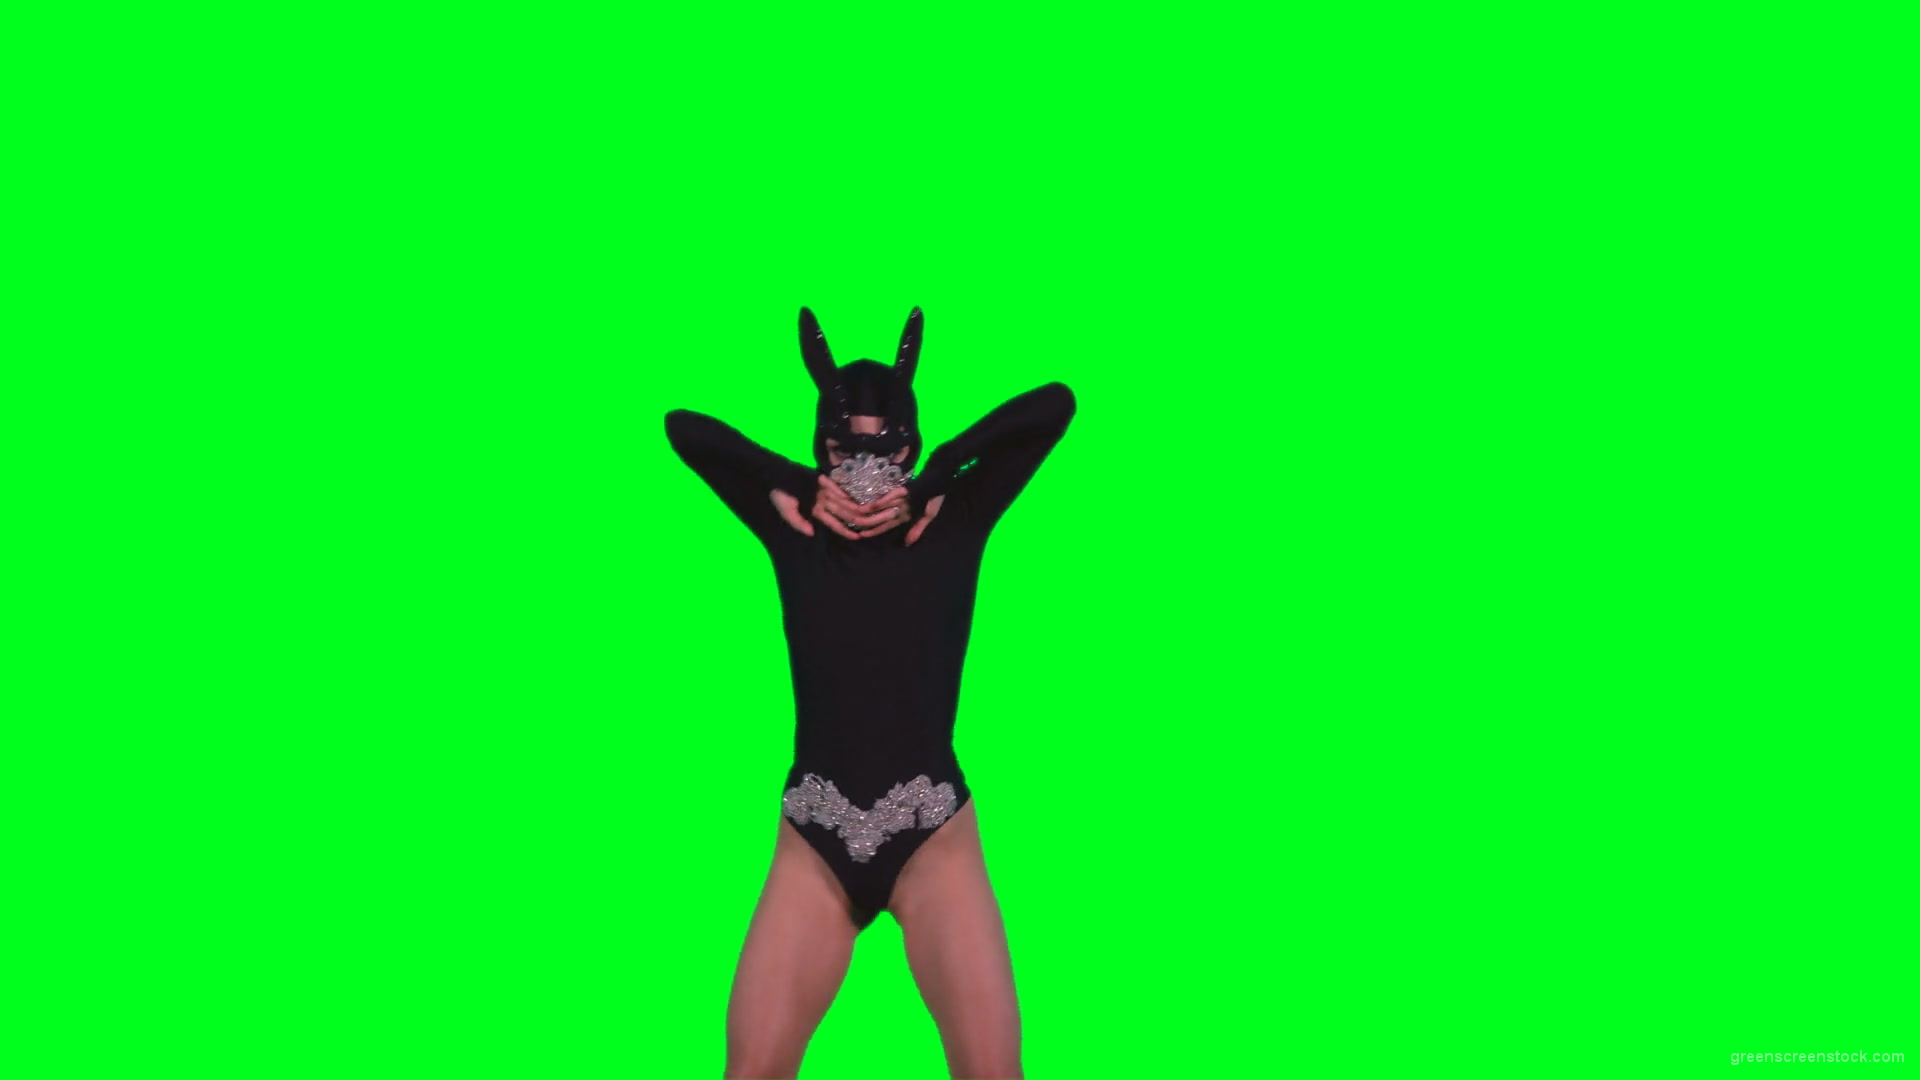 Sexy-bunny-girl-dance-performs-in-rabbit-costume-on-green-screen-4K-Video-Footage-1920_008 Green Screen Stock